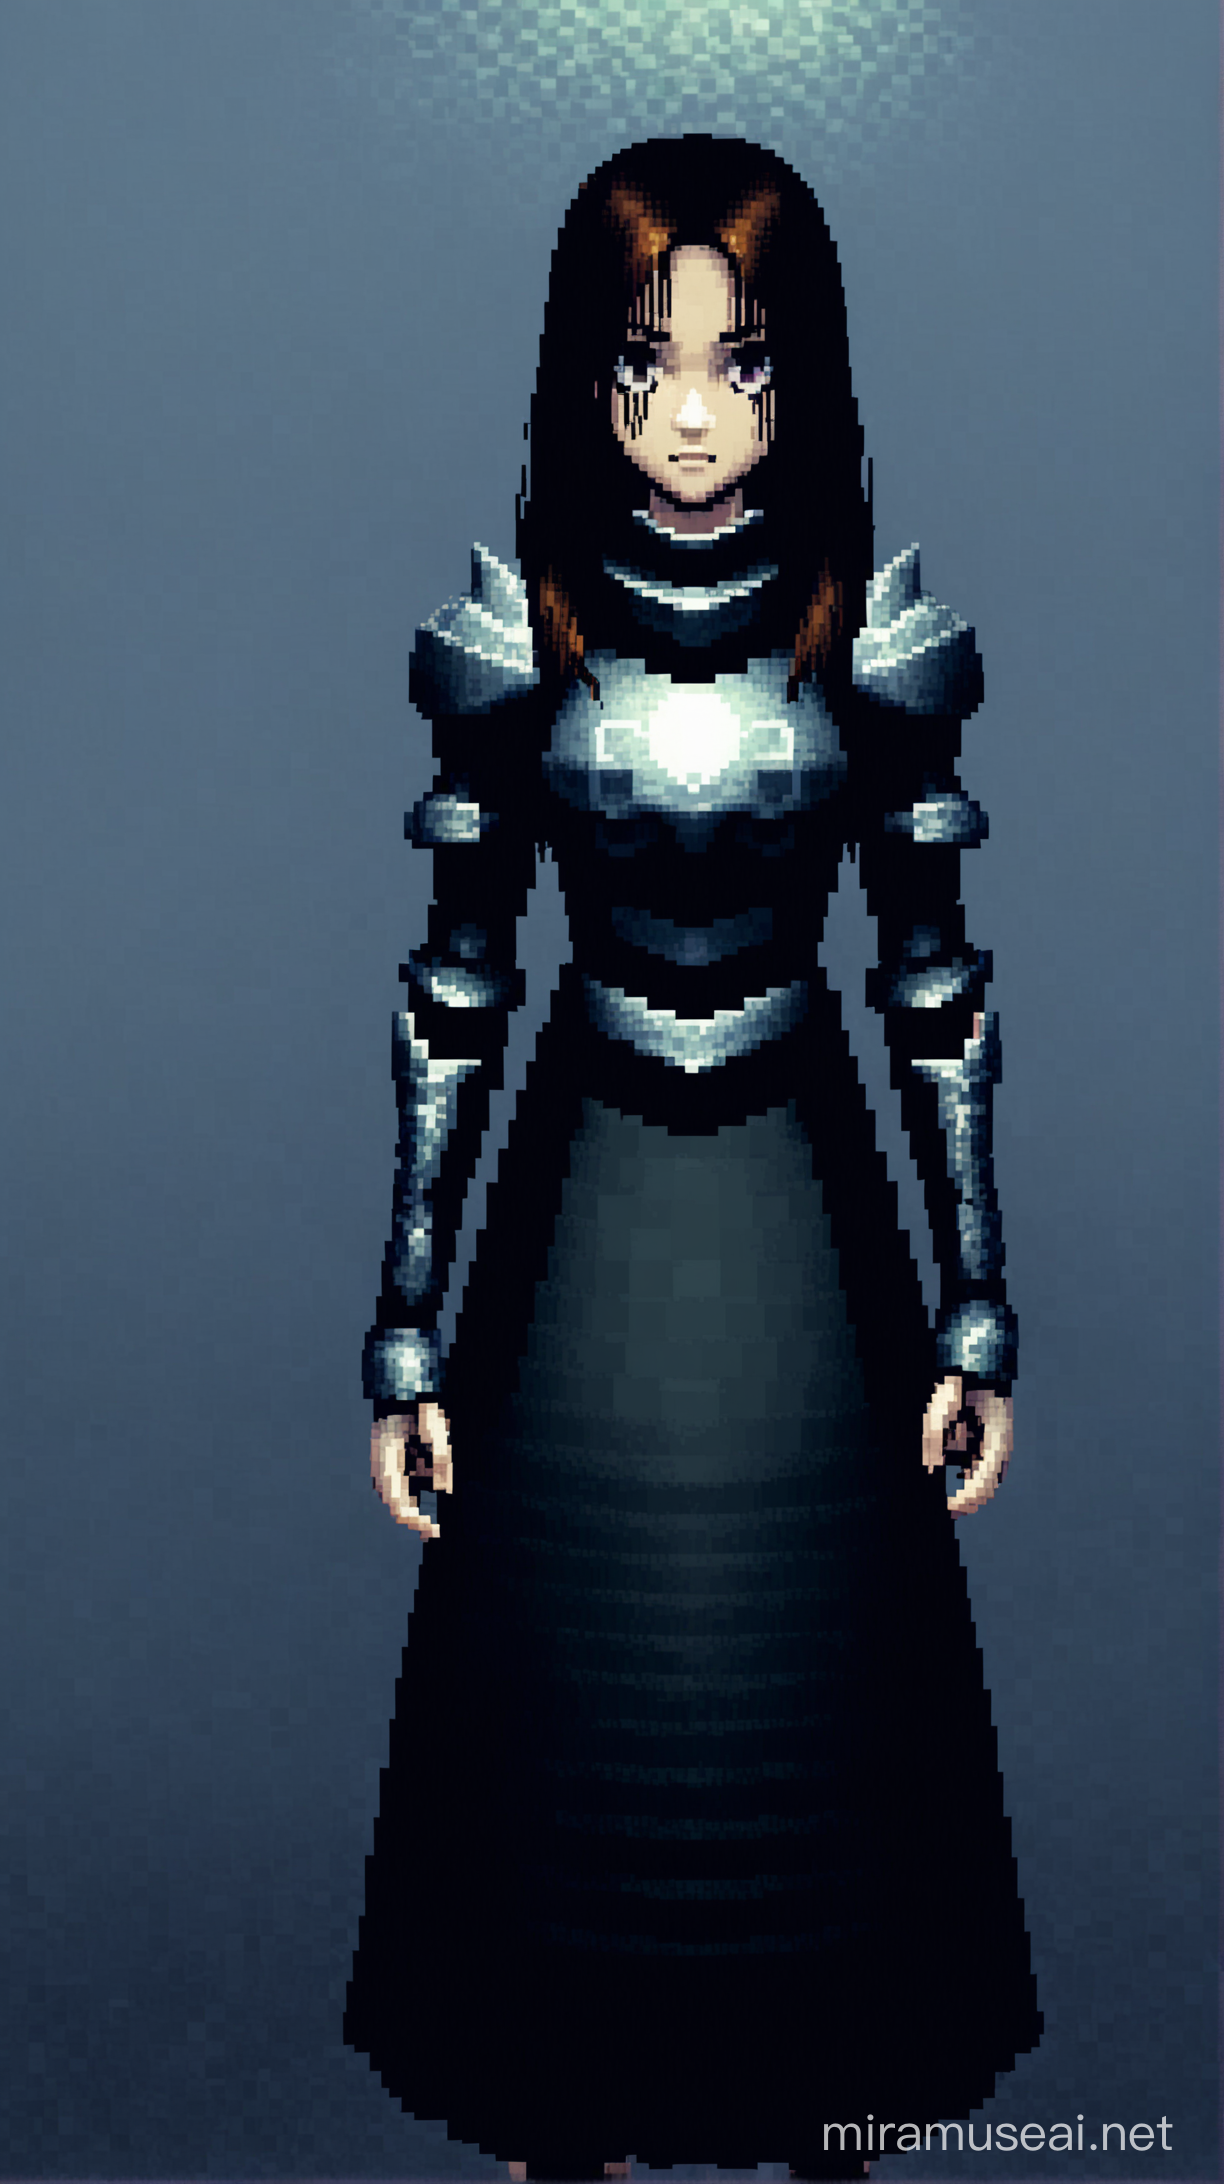 Gothic Female Protagonist in Pixelated PS2 Game Scene